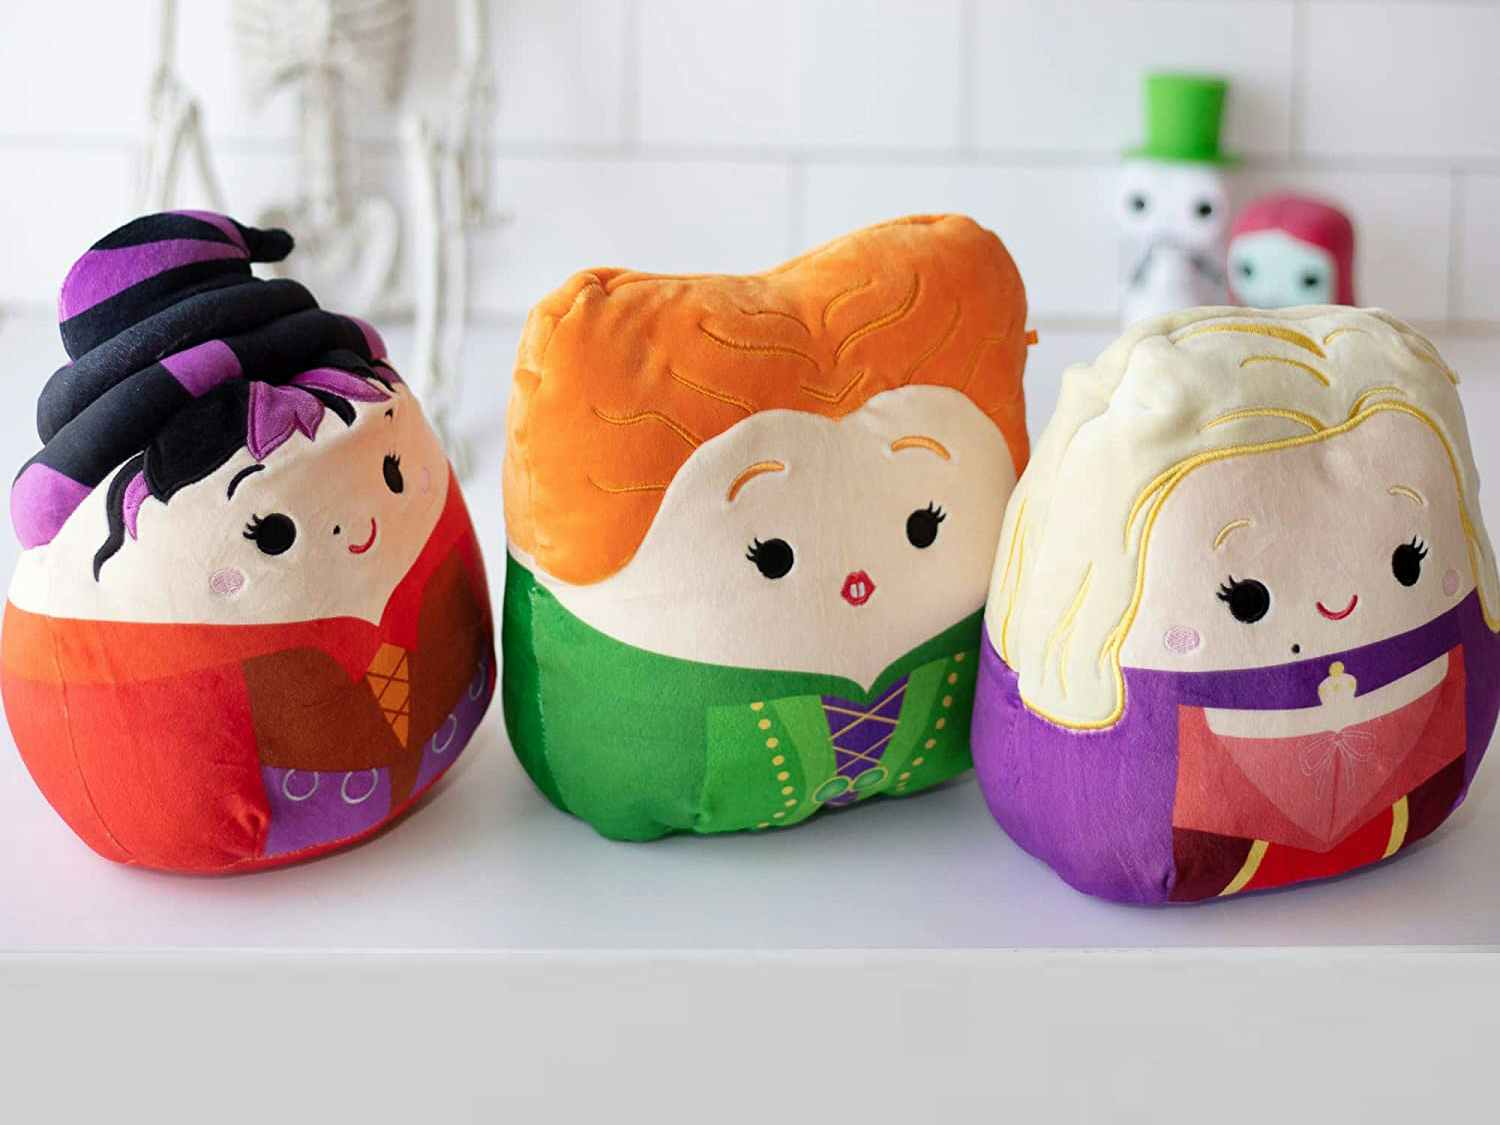 The Hocus Pocus Sanderson Sisters three piece Squishmallow set staged on a counter.